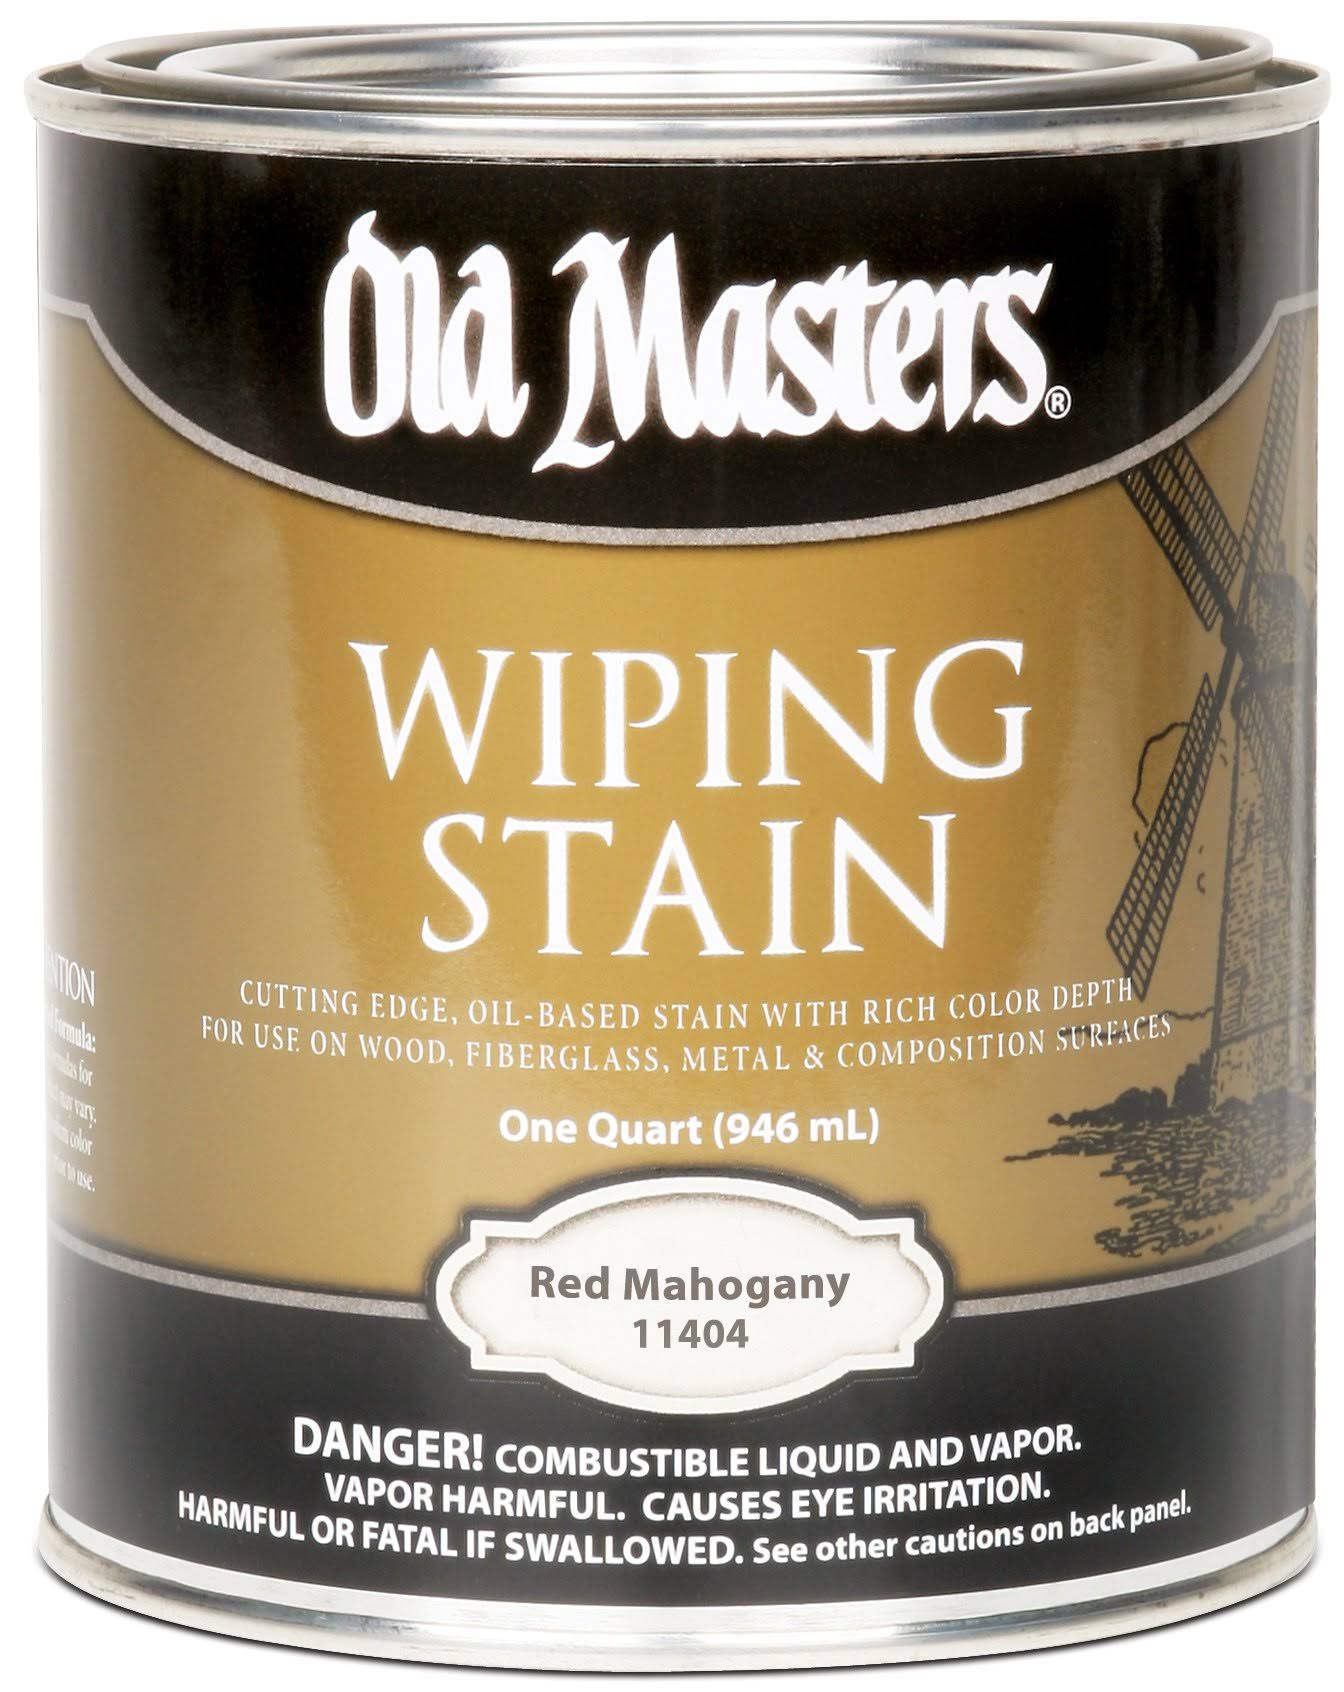 Old Masters Wiping Stain - 11404 Red Mahogany